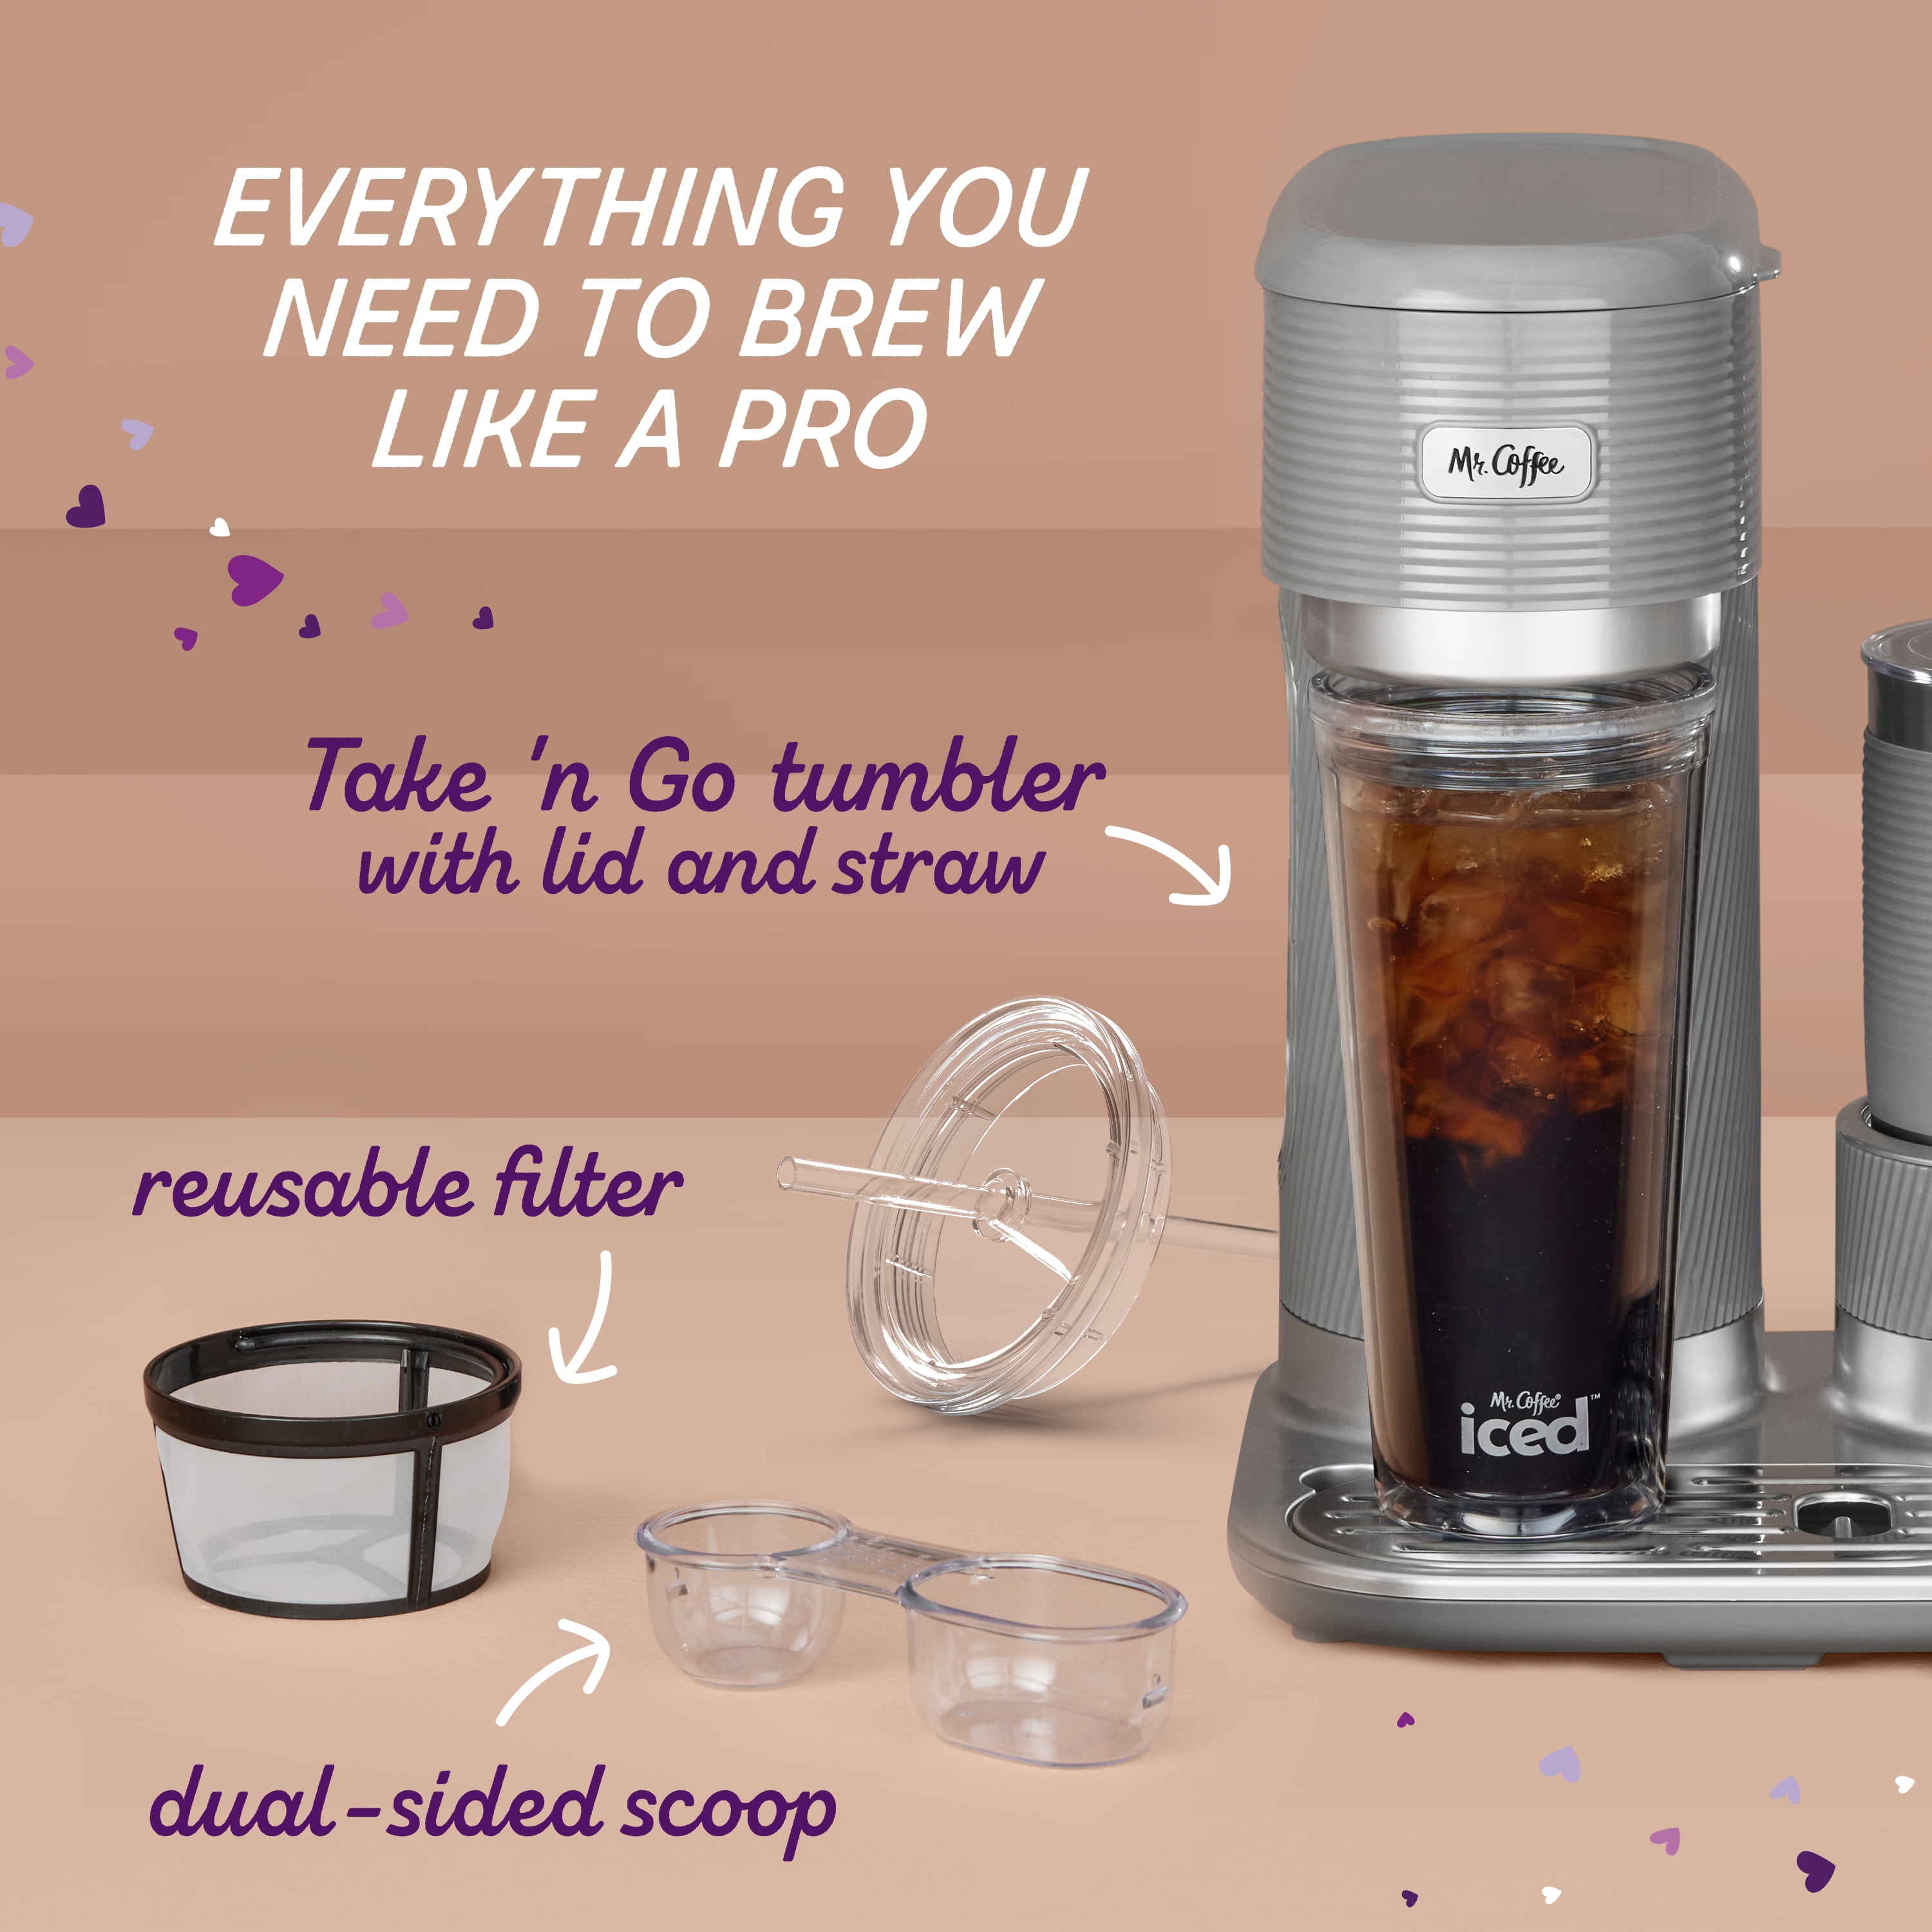 Review Mr. Coffee 4 in 1 Latte Lux Iced Coffee Hot Coffee Maker